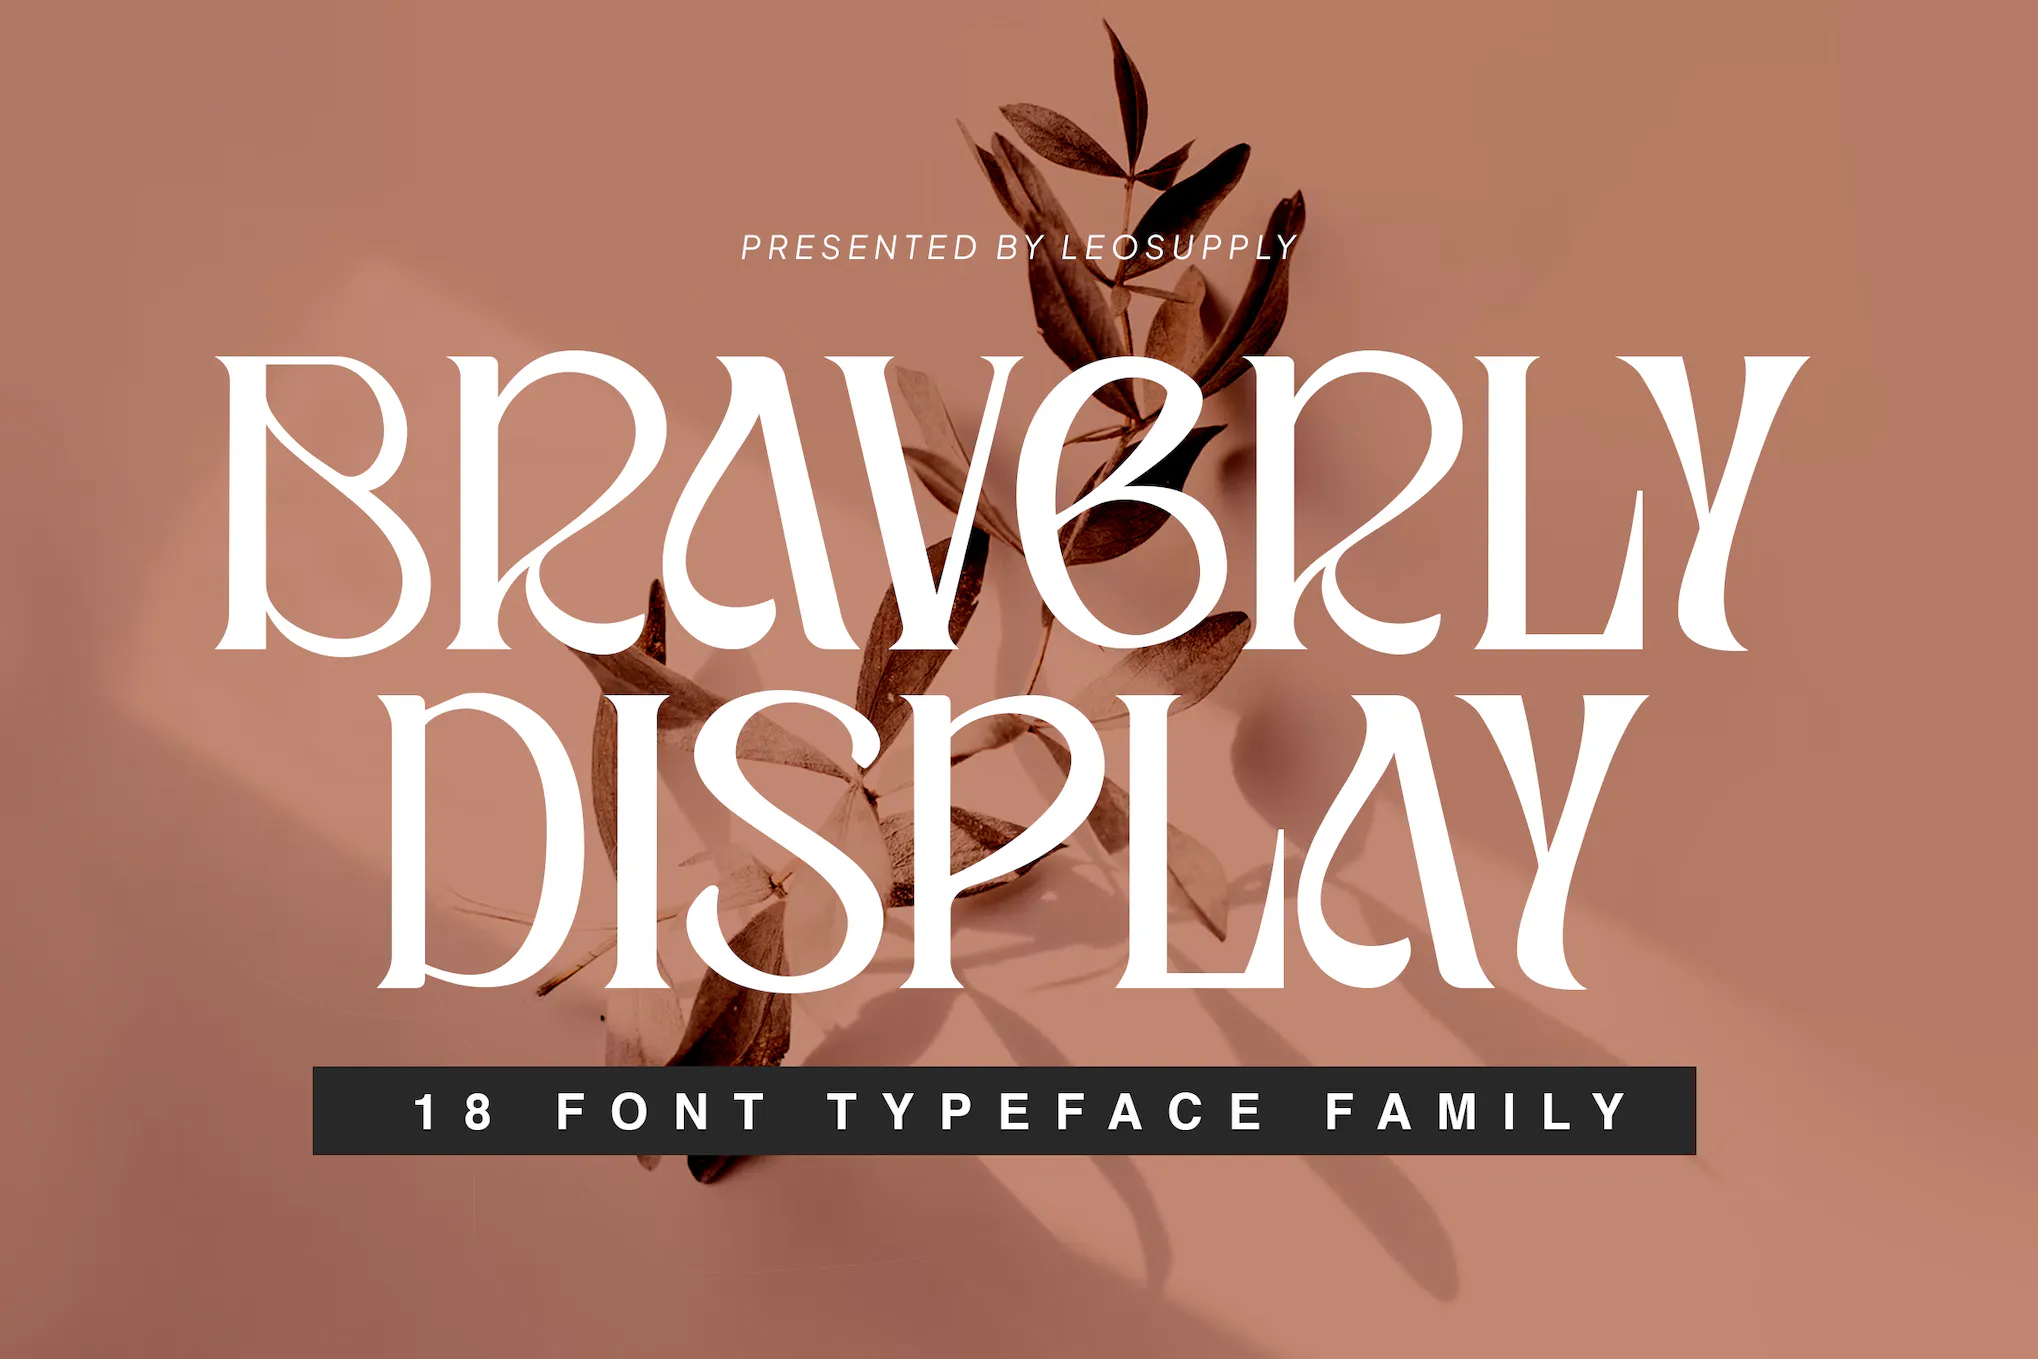 Braverly Display font preview image #1